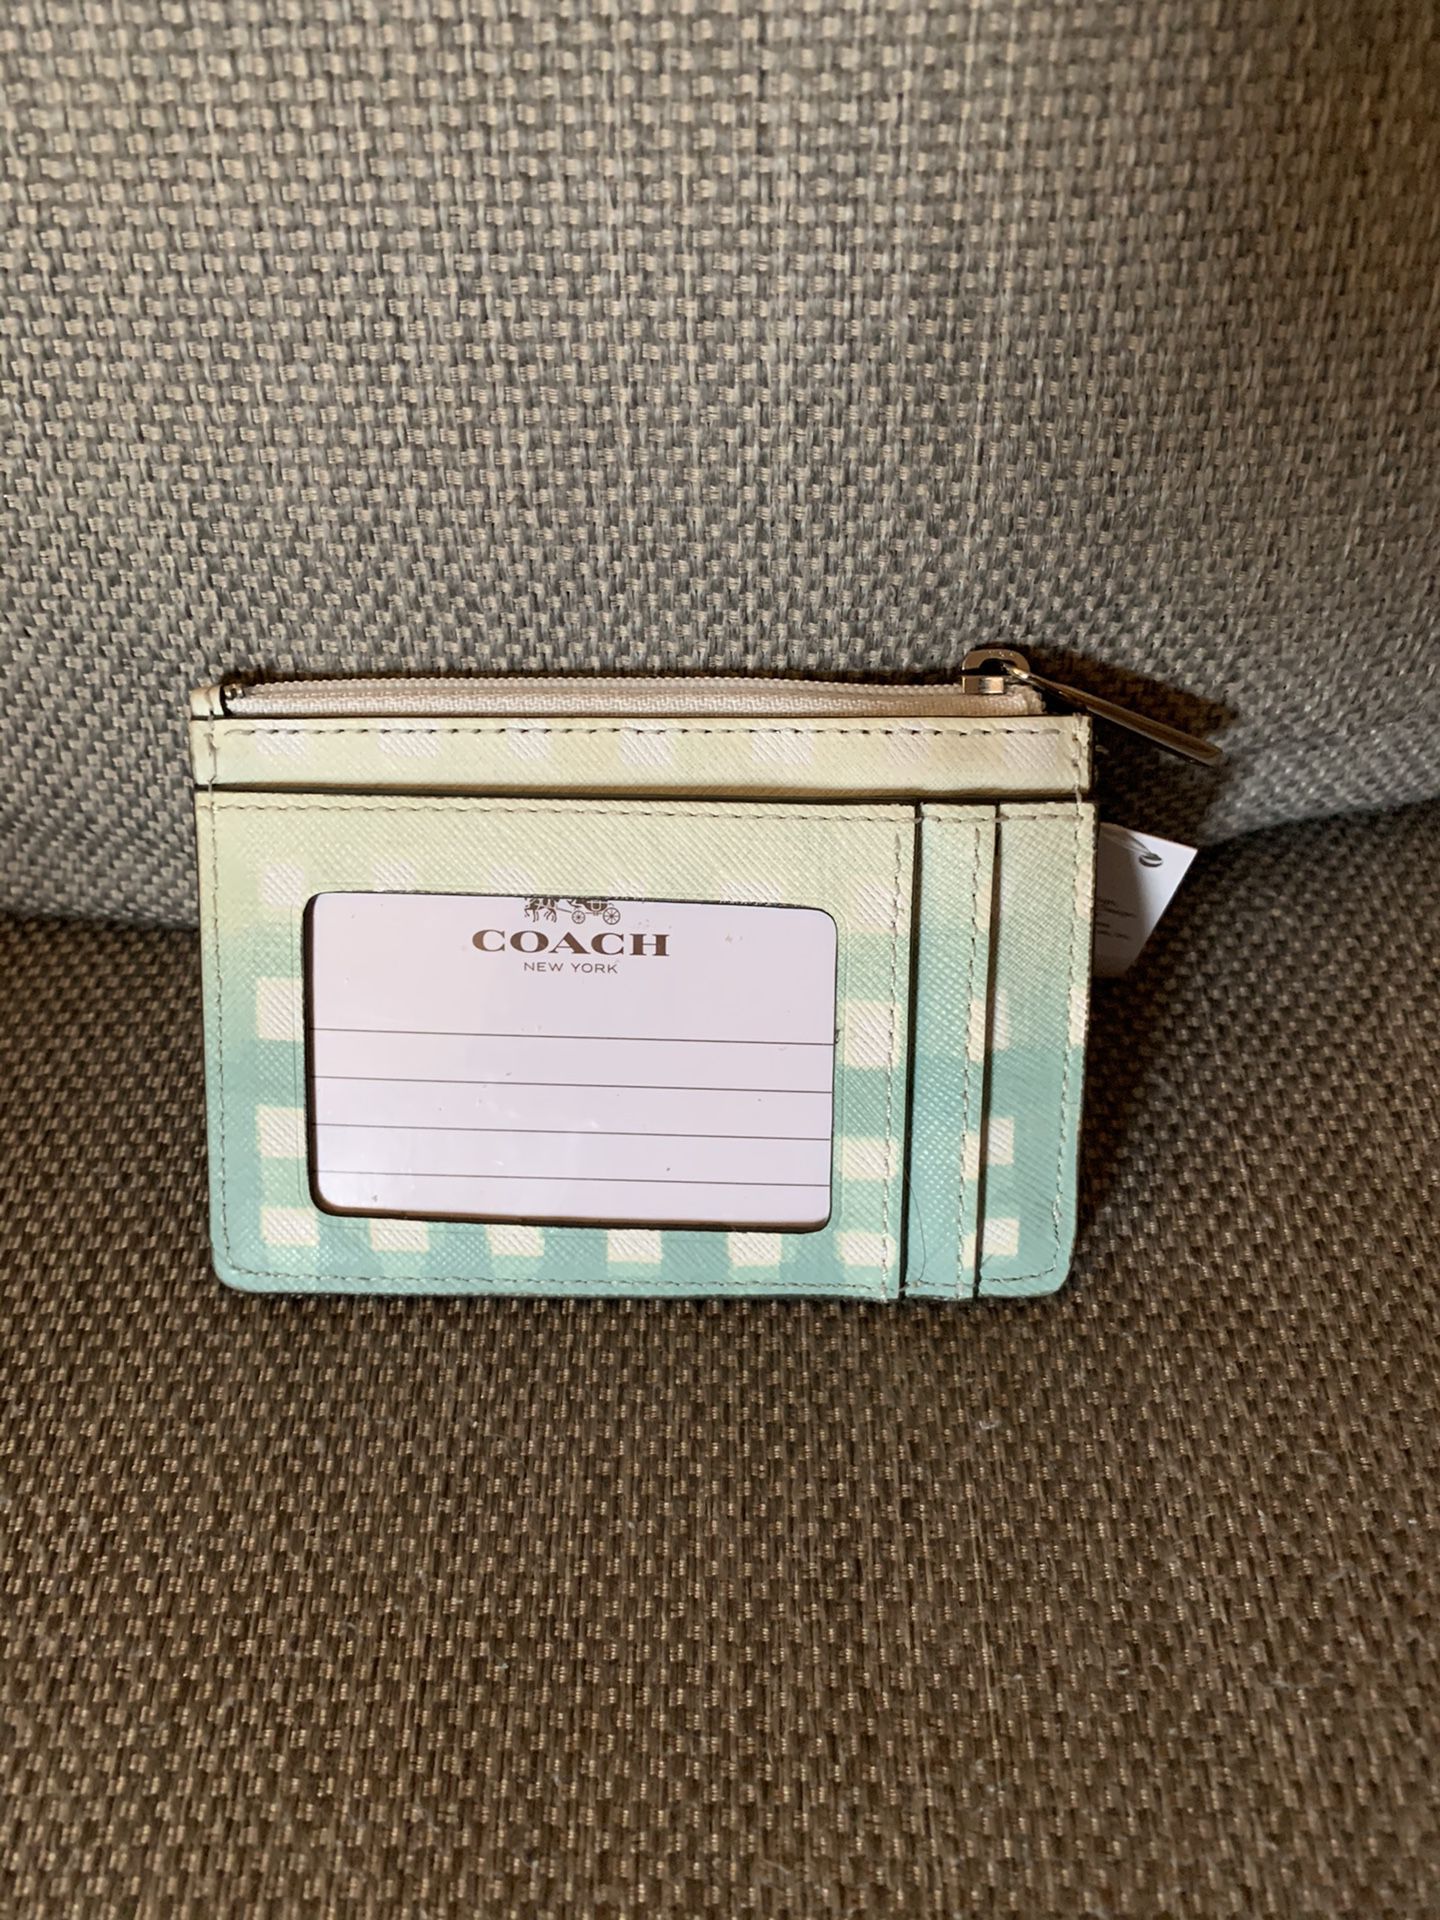 COACH small wallet -brand new